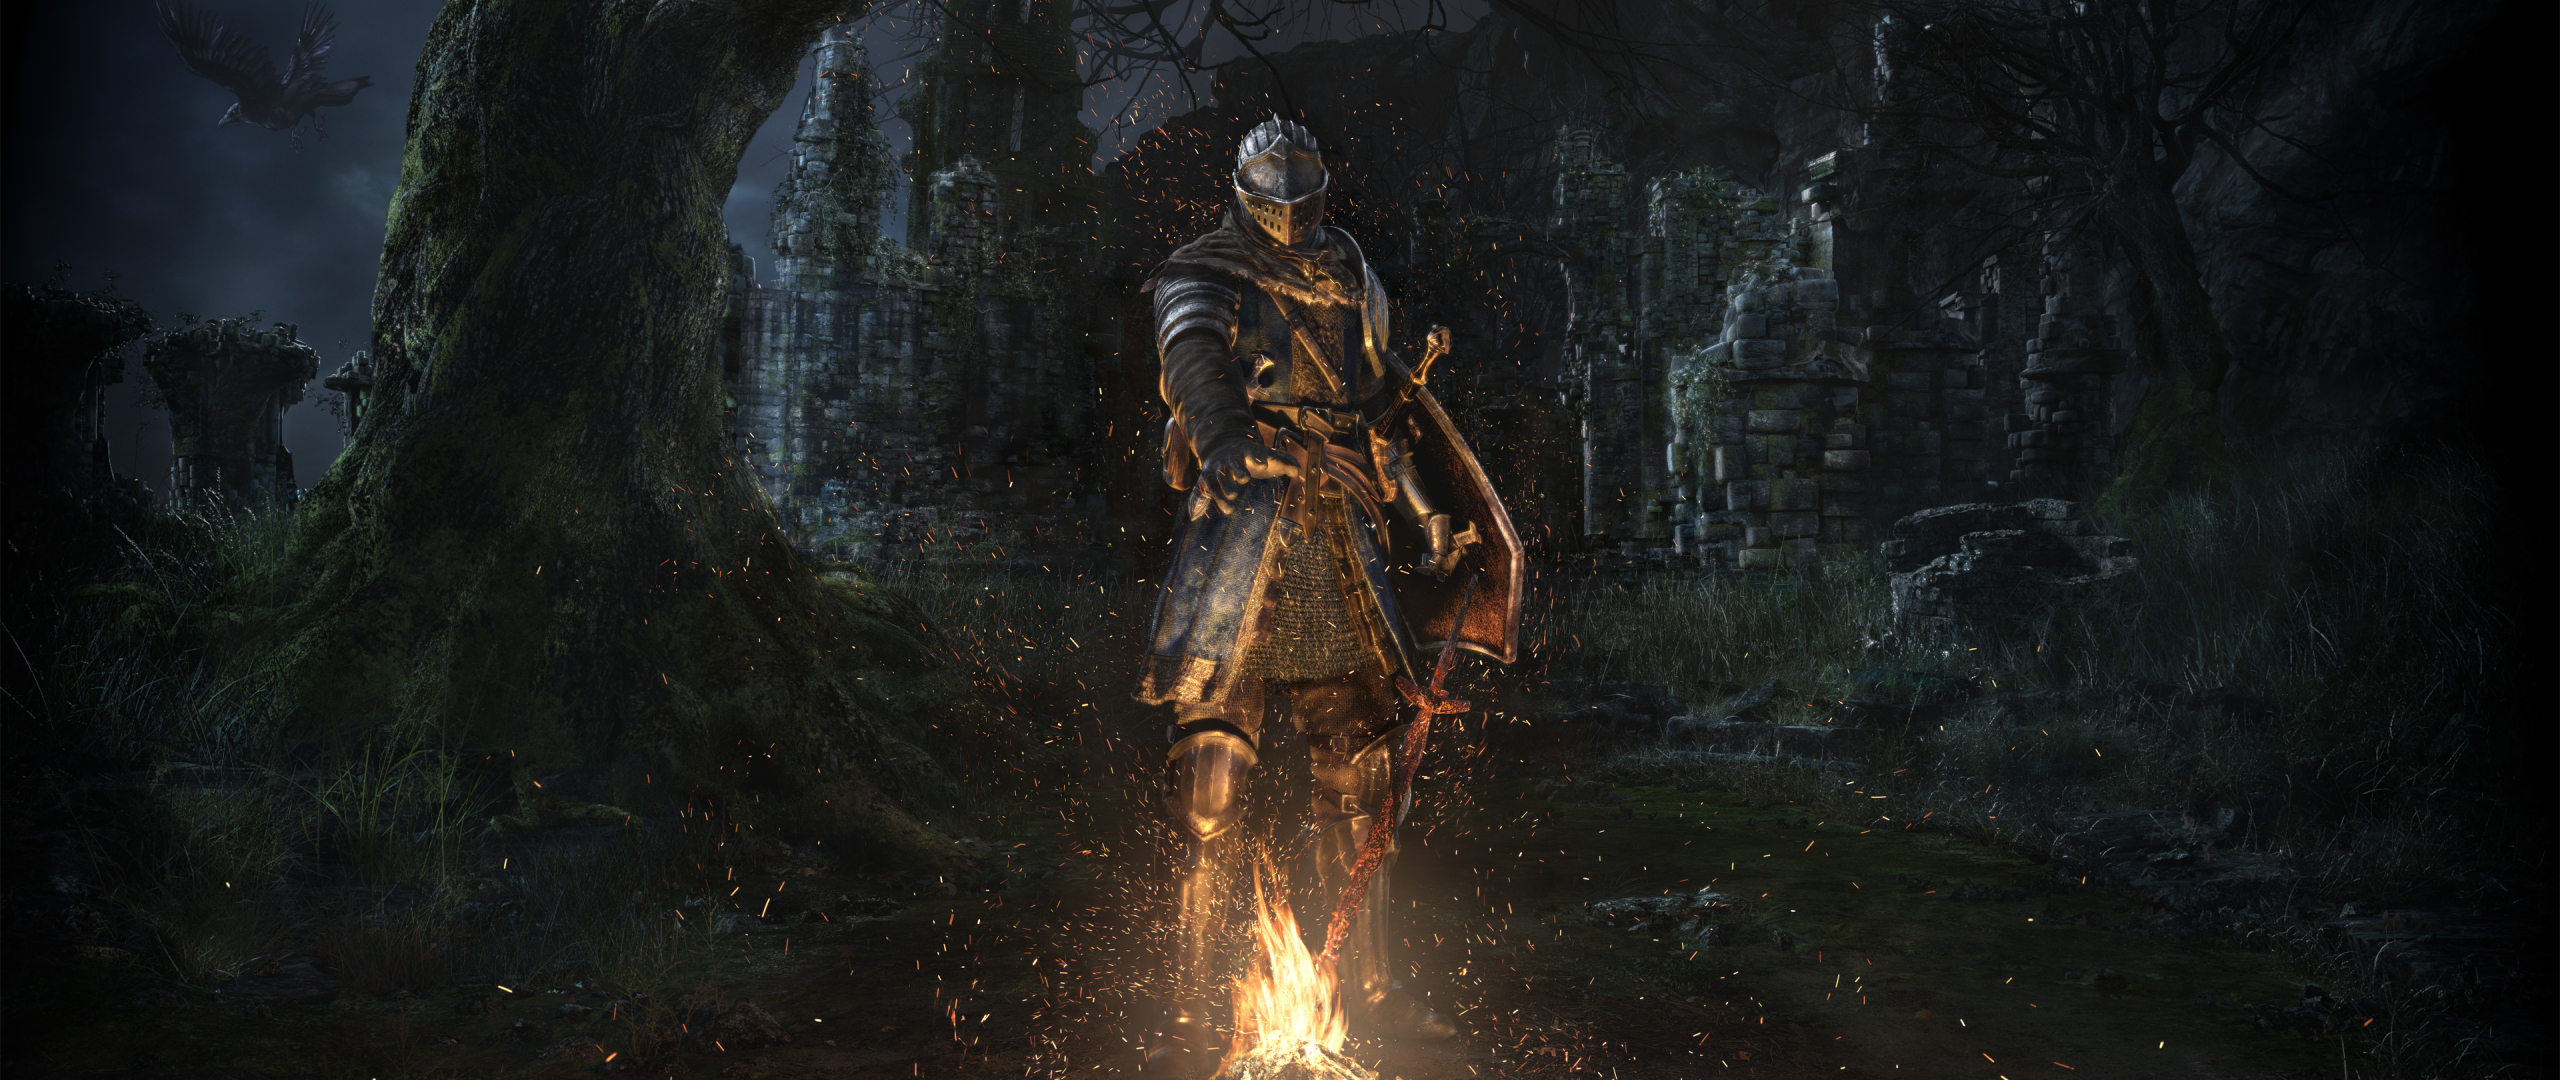 2560x1080 Dark Souls Remastered 2560x1080 Resolution Wallpaper Hd Games 4k Wallpapers Images Photos And Background